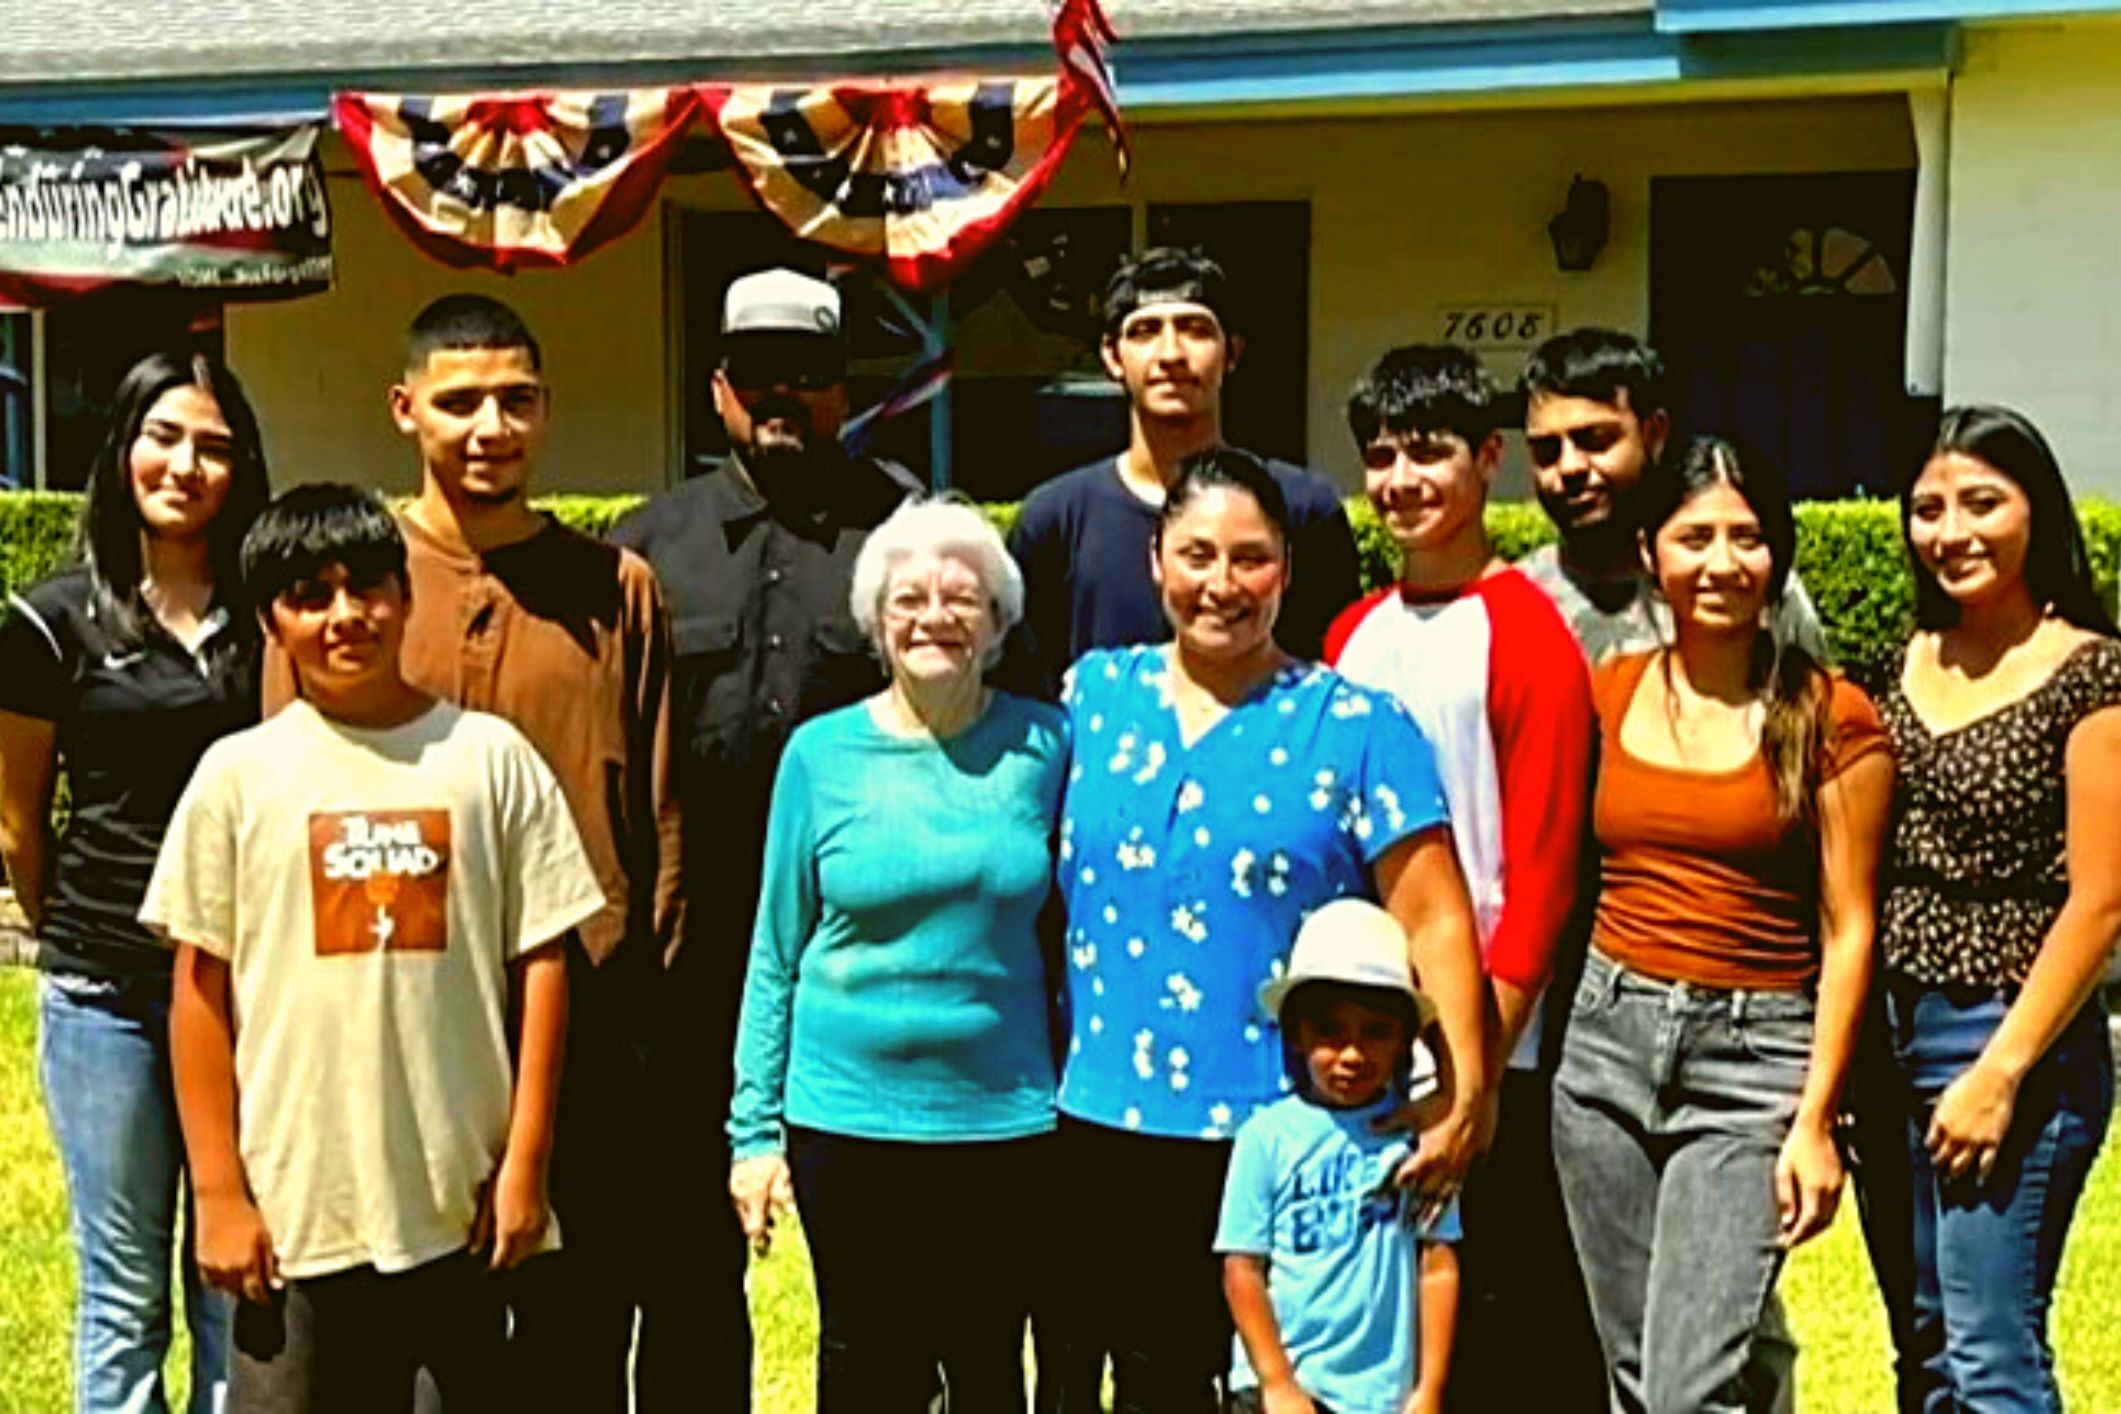 Family “adopts” homeless elderly widow to teach their kids to care for seniors